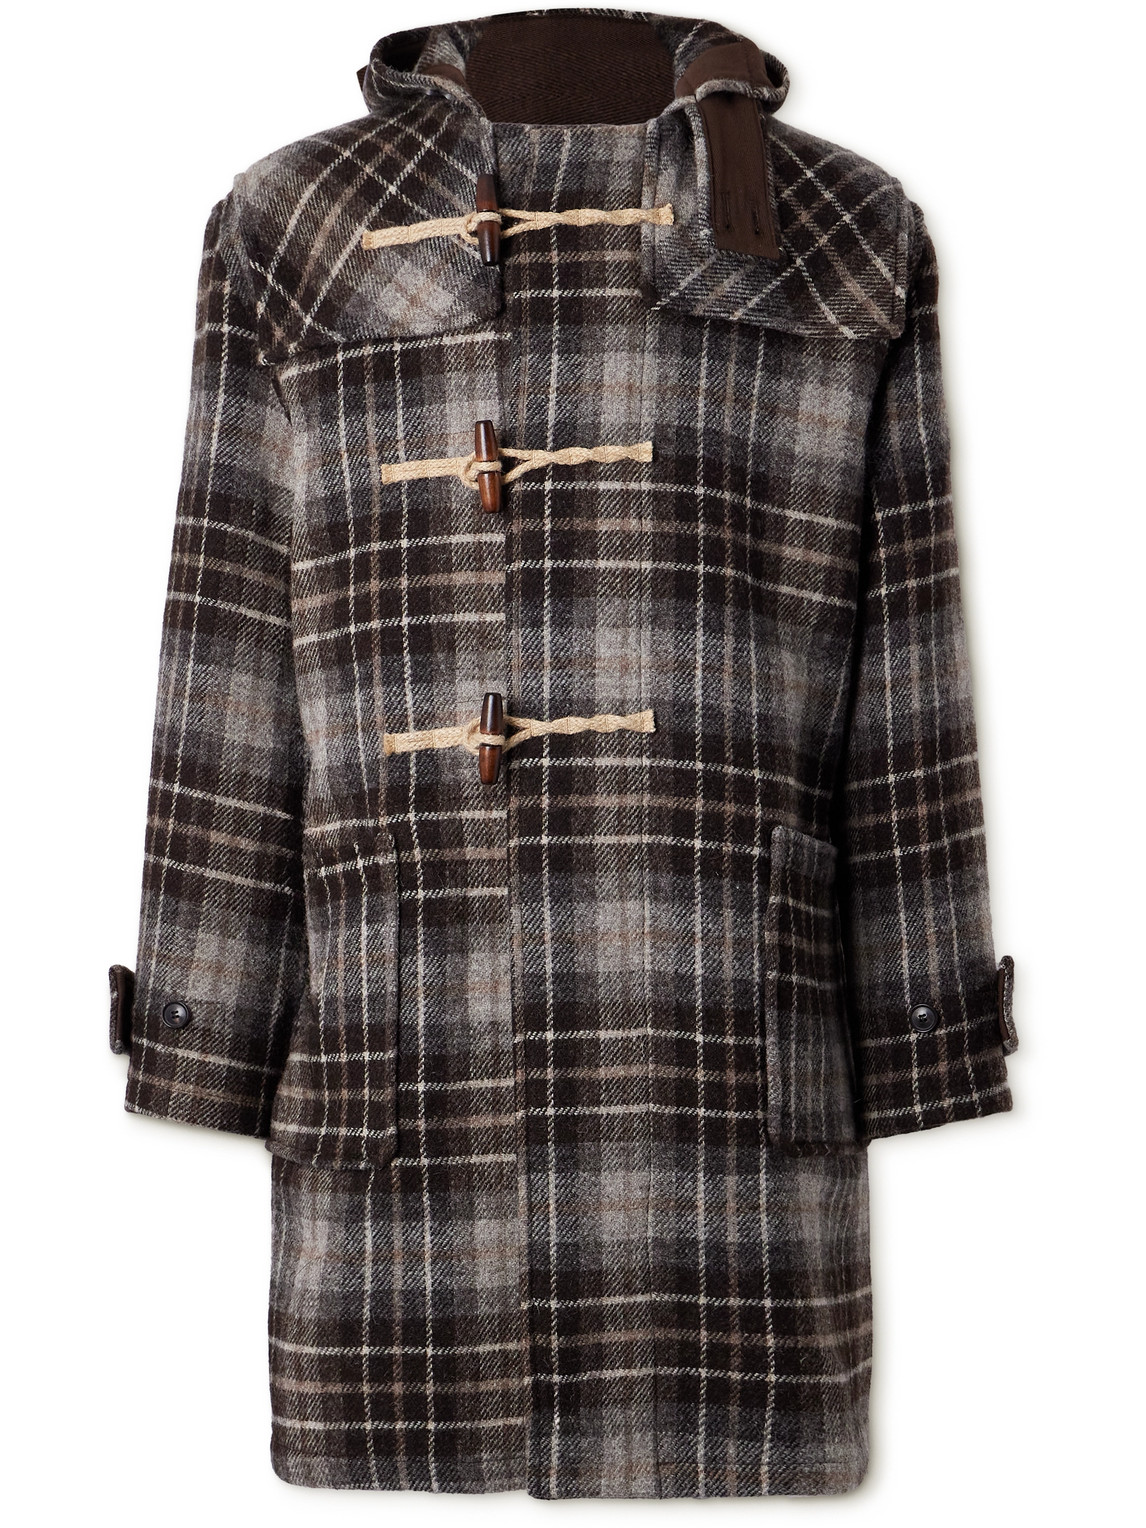 DE BONNE FACTURE GLOVERALL CHECKED WOOL-TWEED HOODED COAT